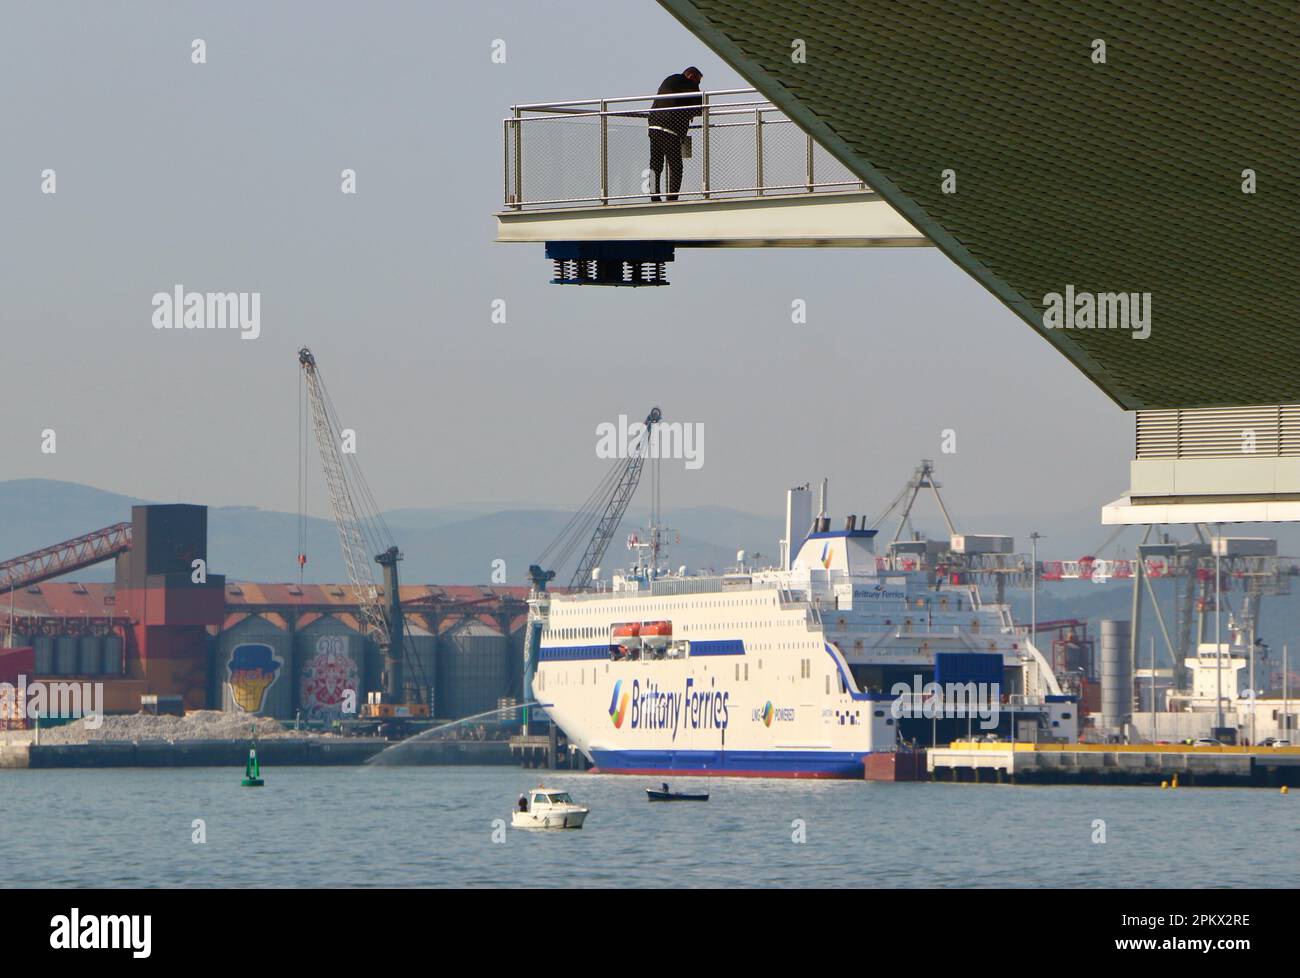 Early spring morning with a man on a walkway at the Centro Botin Botin Centre Arts Centre and a Brittany Ferries ship Santander Cantabria Spain Stock Photo